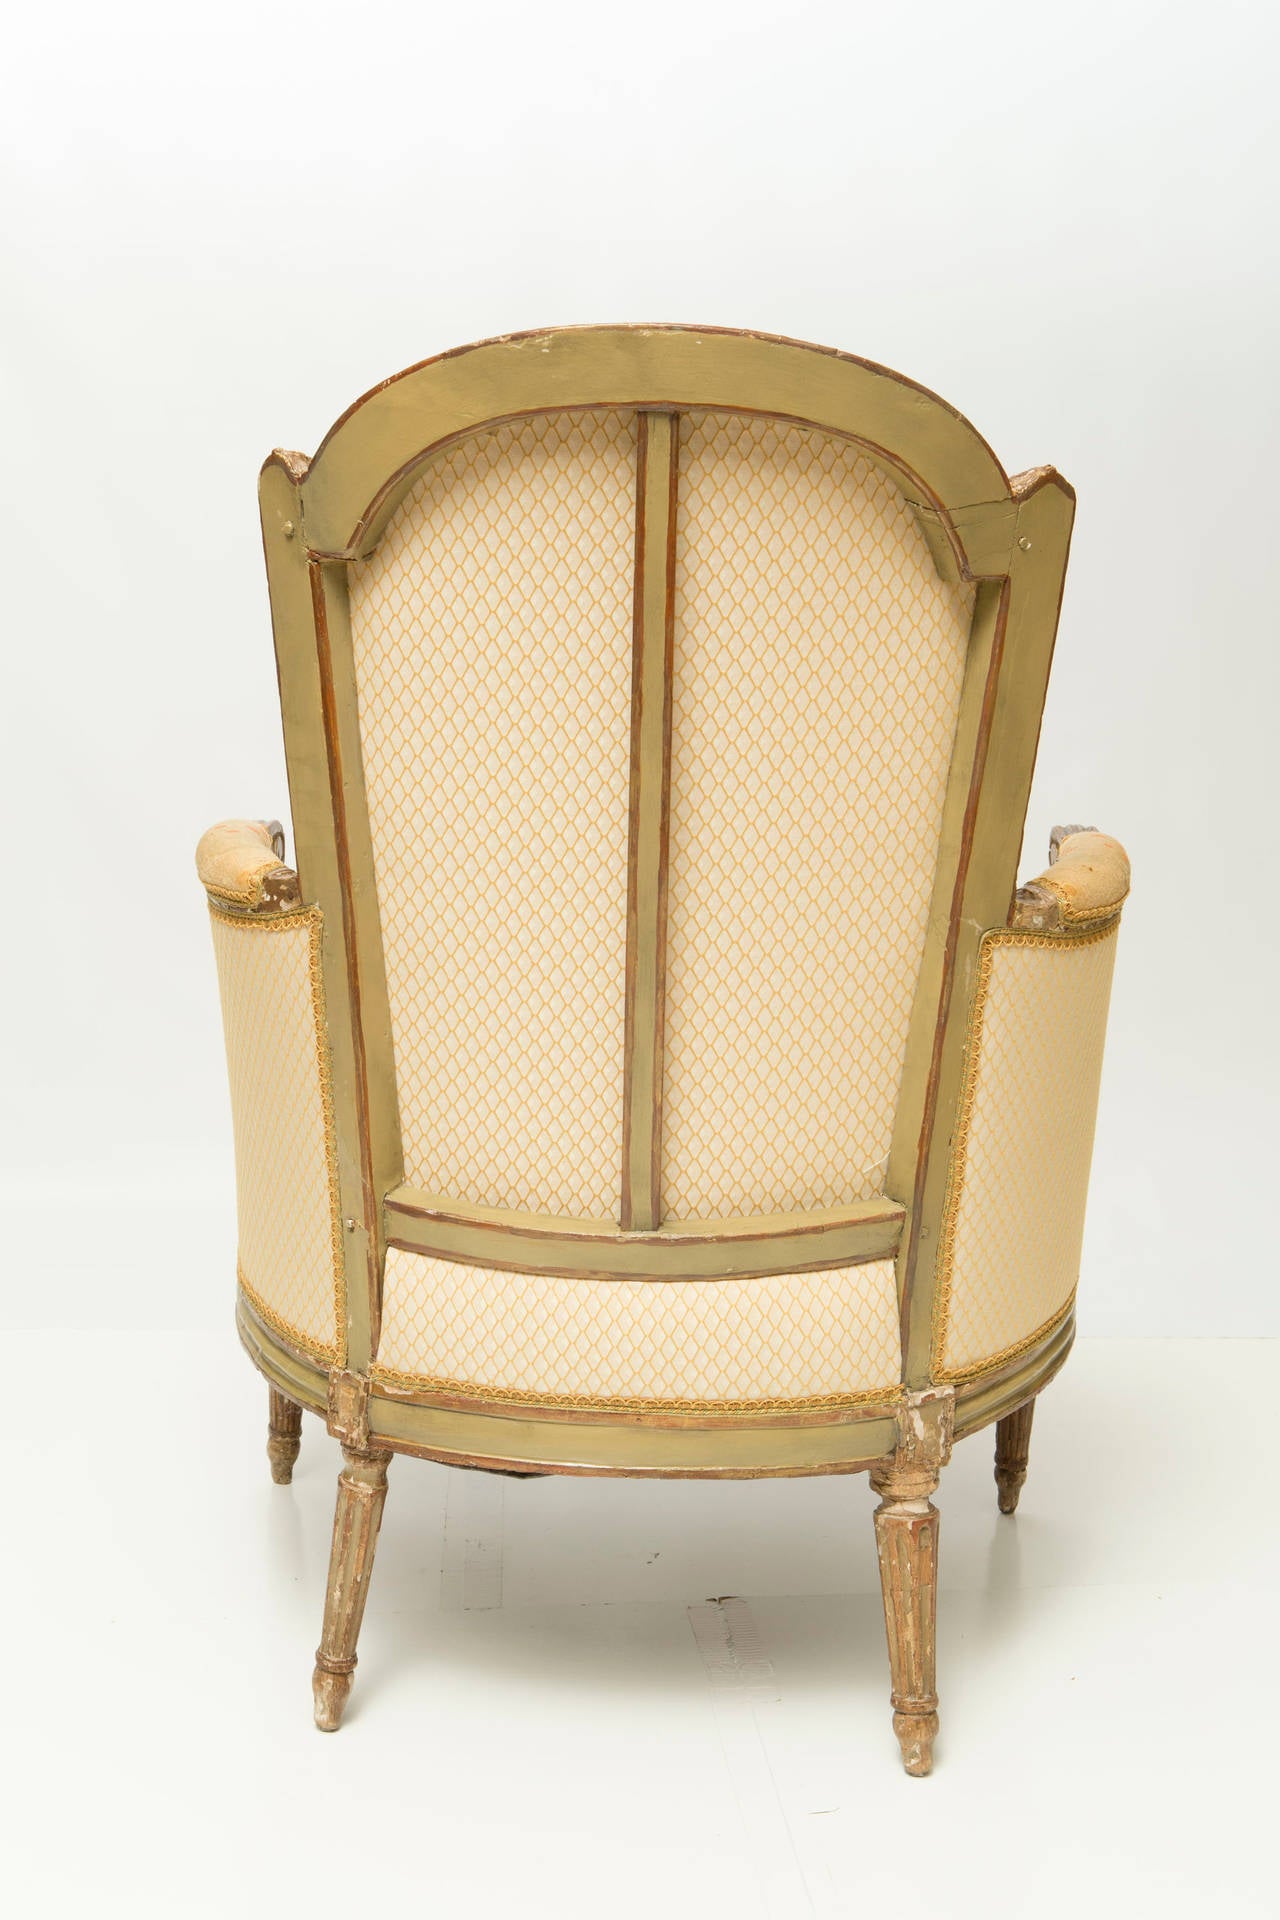 19th Century French Bergere Chair 1